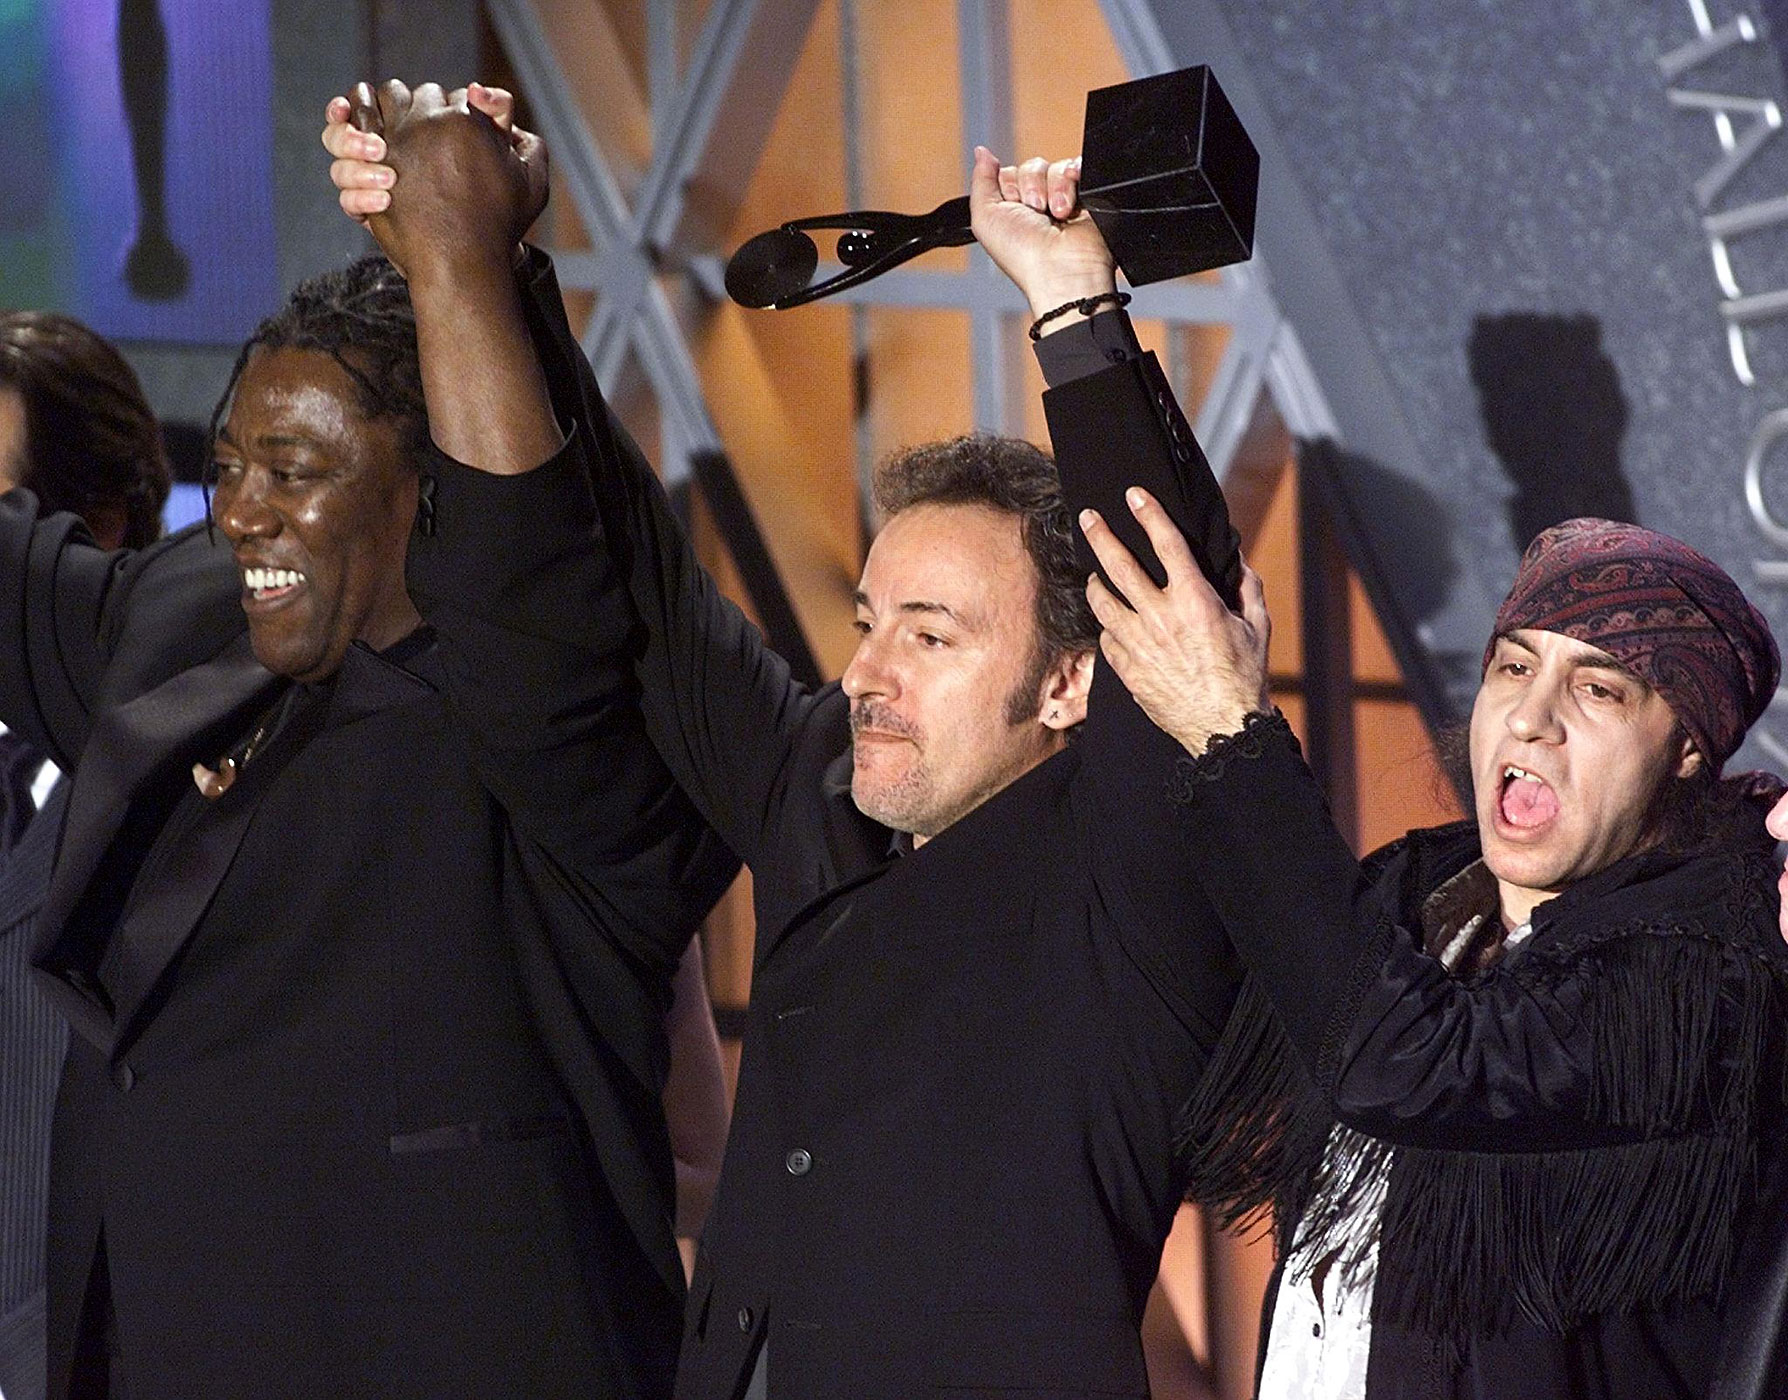 1999: 
                              Springsteen was inducted into Rock and Roll Hall of Fame by U2 frontman Bono, “They call him the Boss,” said Bono. “He’s not the boss. He works for us. More than a boss, he’s the owner, because more than anyone else, Bruce Springsteen owns America’s heart.”